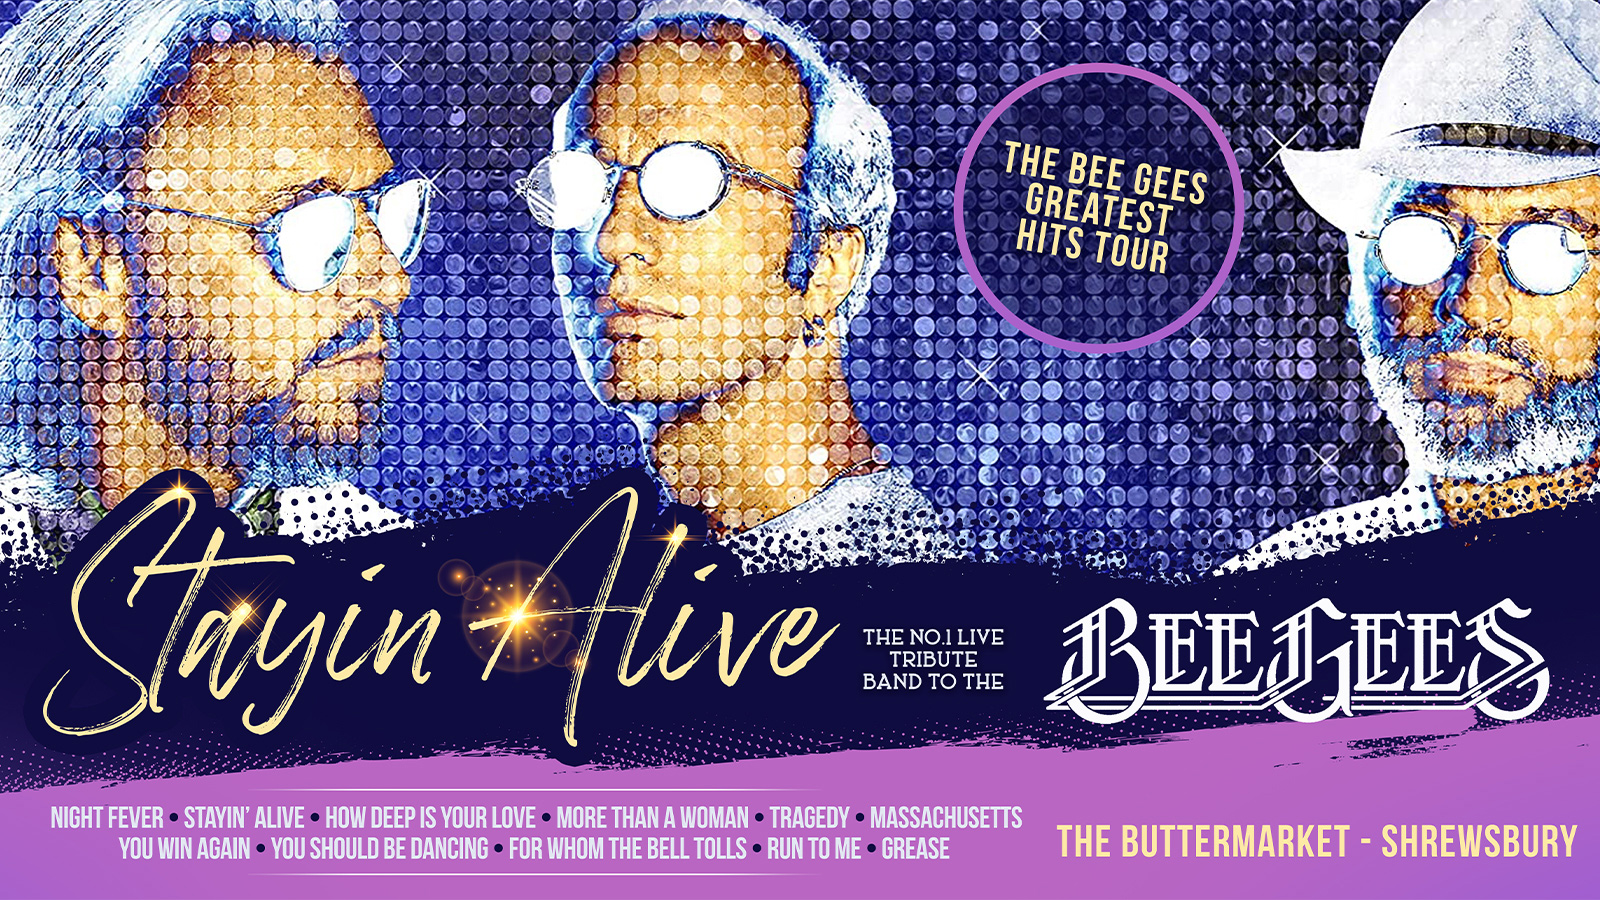 THE BEE GEES GREATEST HITS – with the World’s No.1 live tribute band Staylin’ Alive